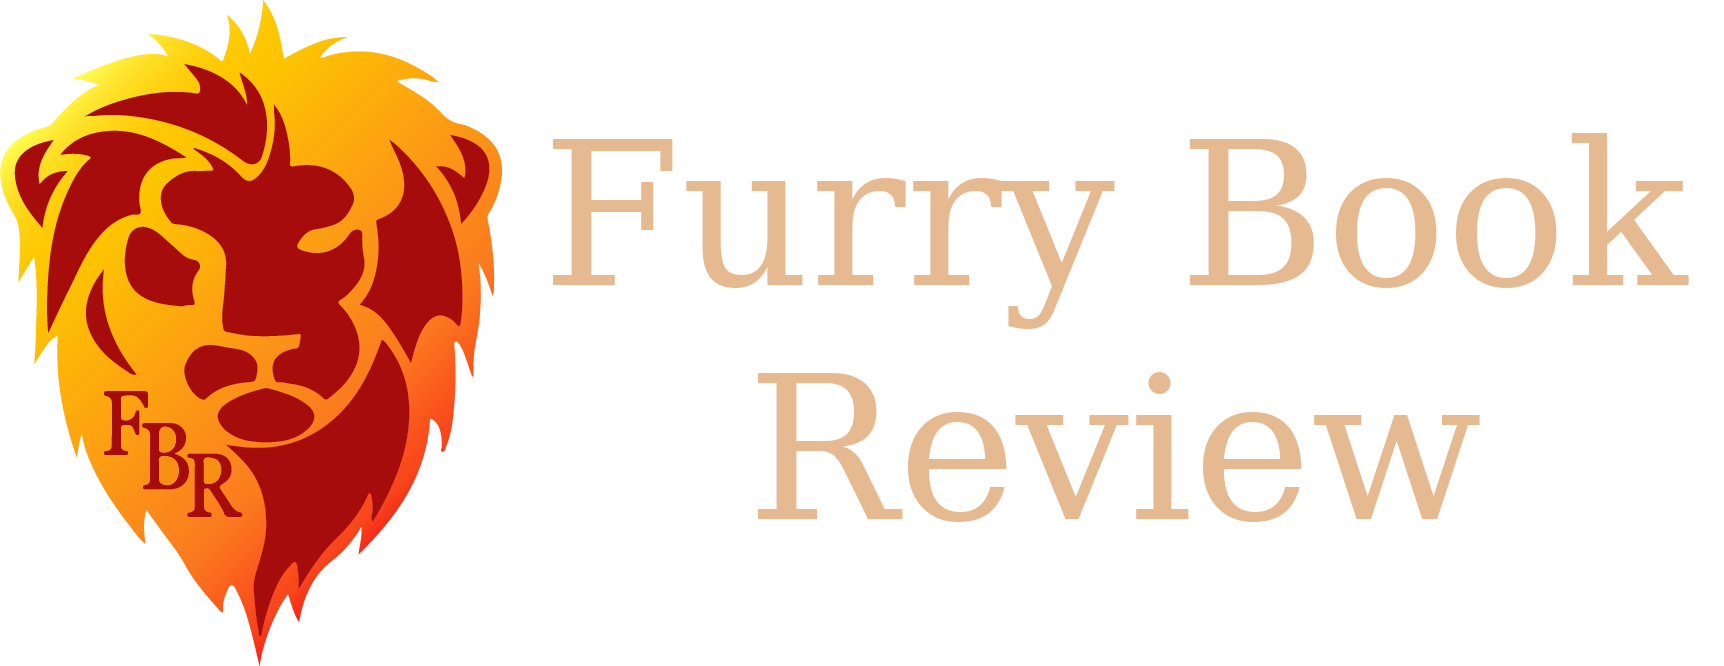 Furry Book Review